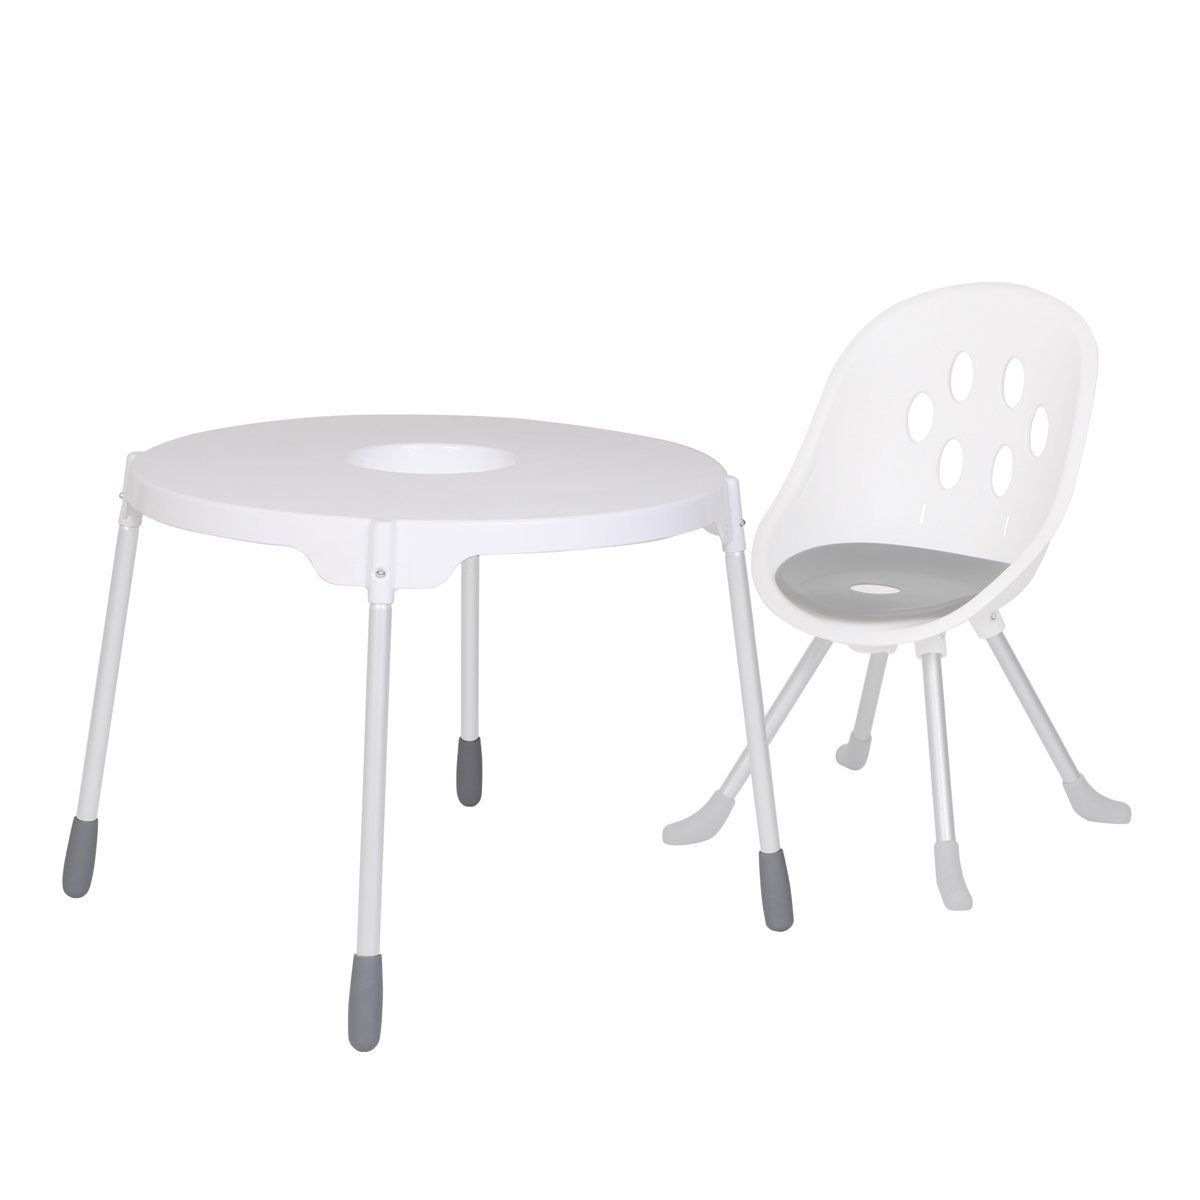 https://cdn.accentuate.io/4720377036877/19466203824322/phil_and_teds_poppy_table_top_with_leg_set_and_poppy_high_chair_1-v1630984576716.jpg?1200x1200